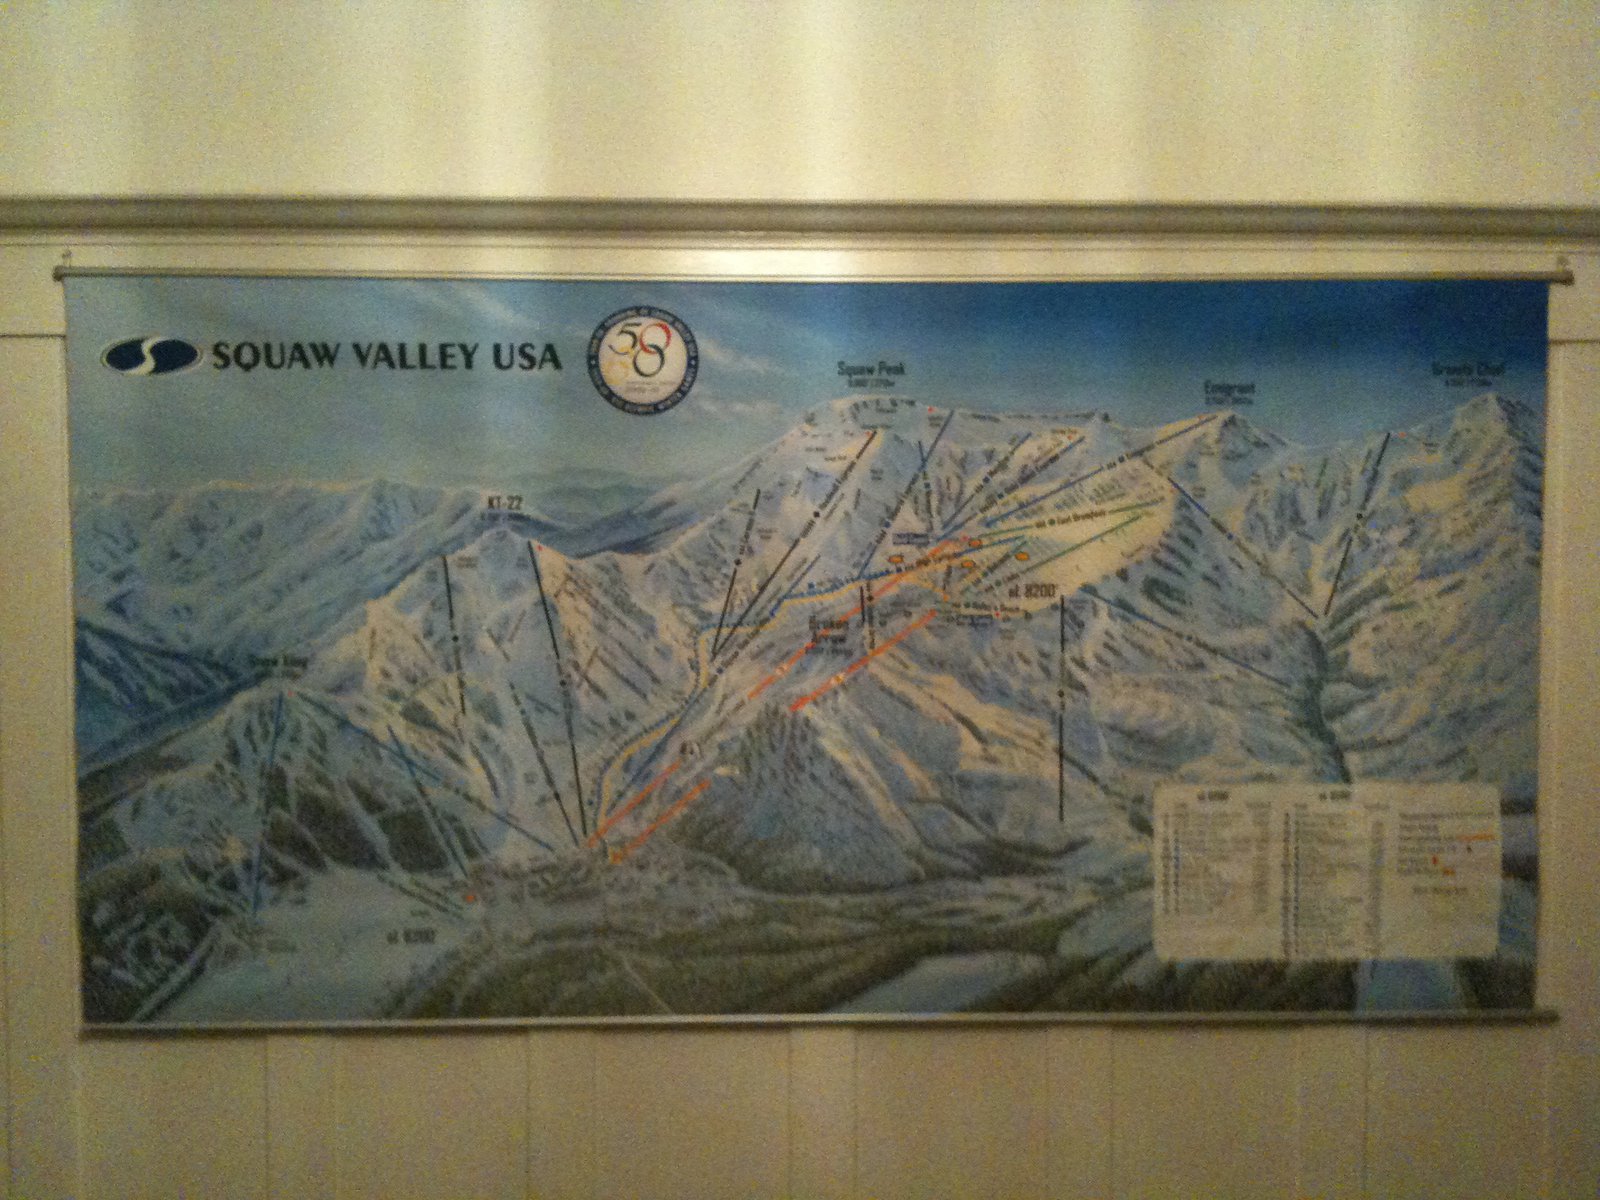 7' x 4' Squaw Valley Trail Map